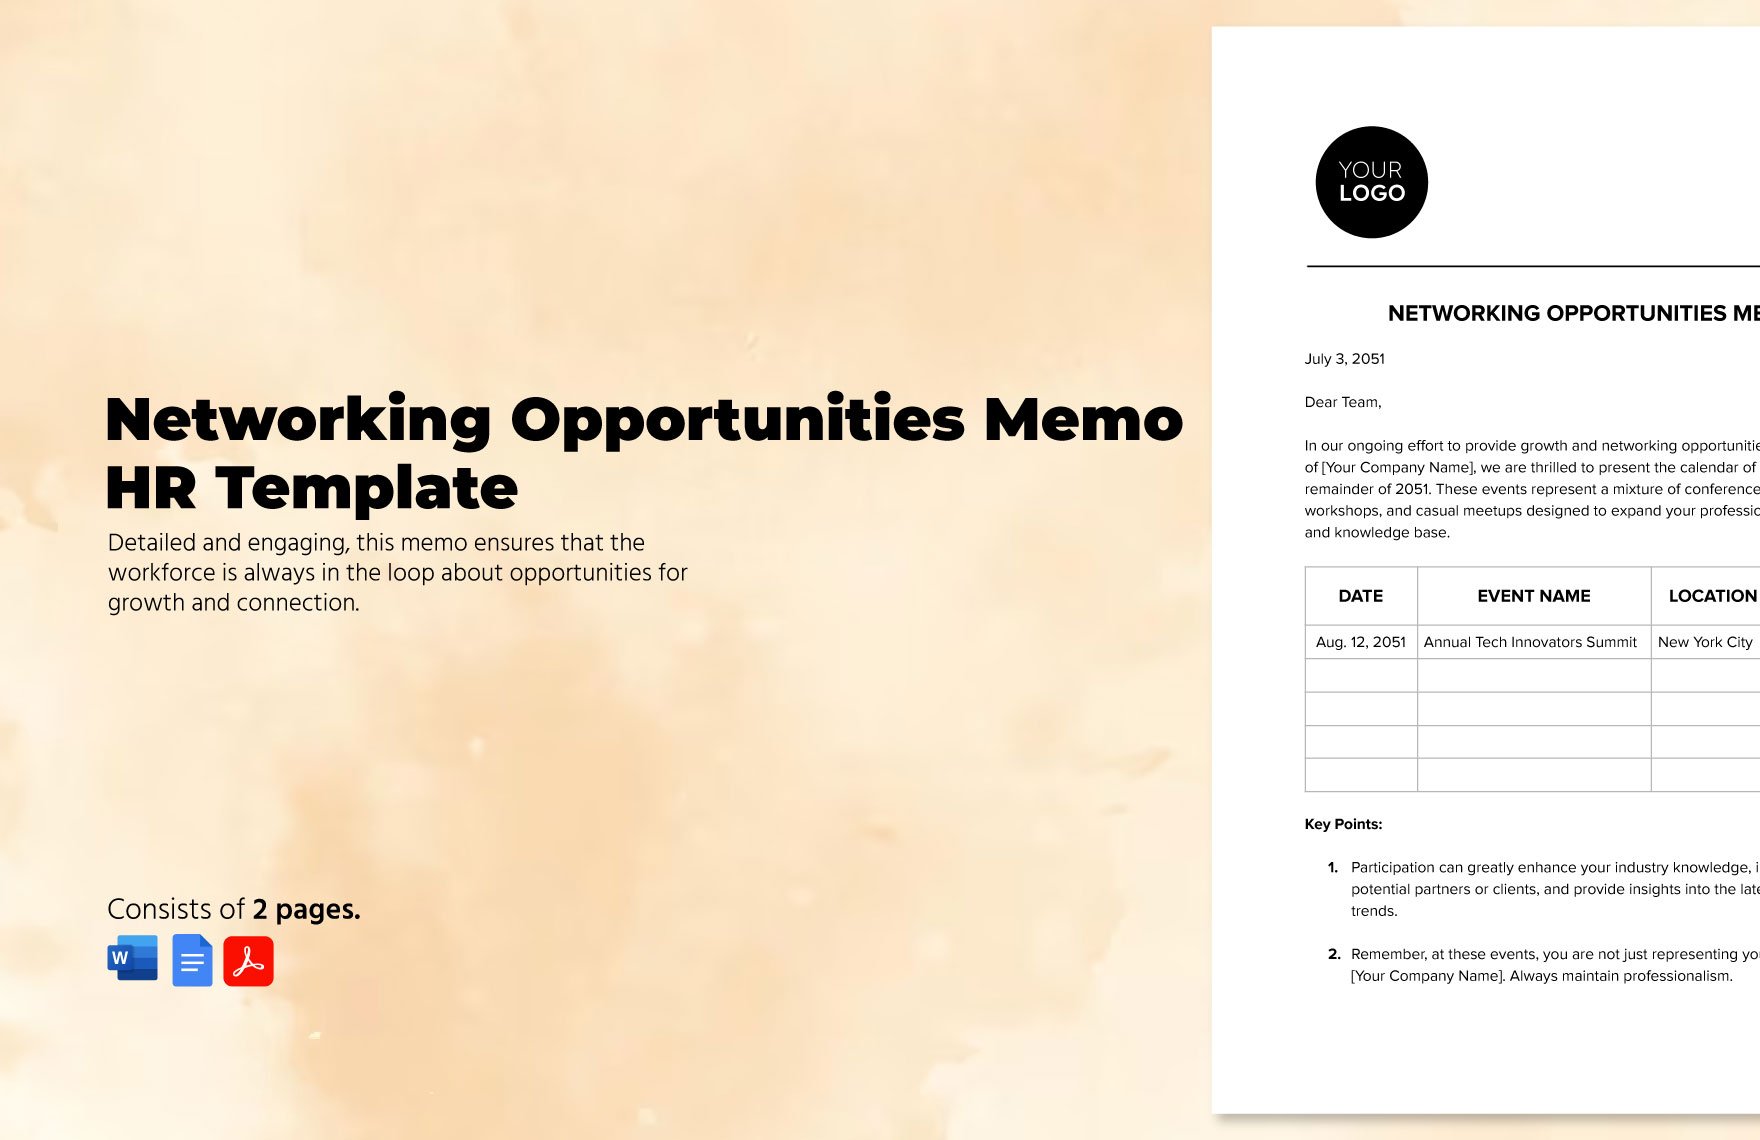 Networking Opportunities Memo HR Template